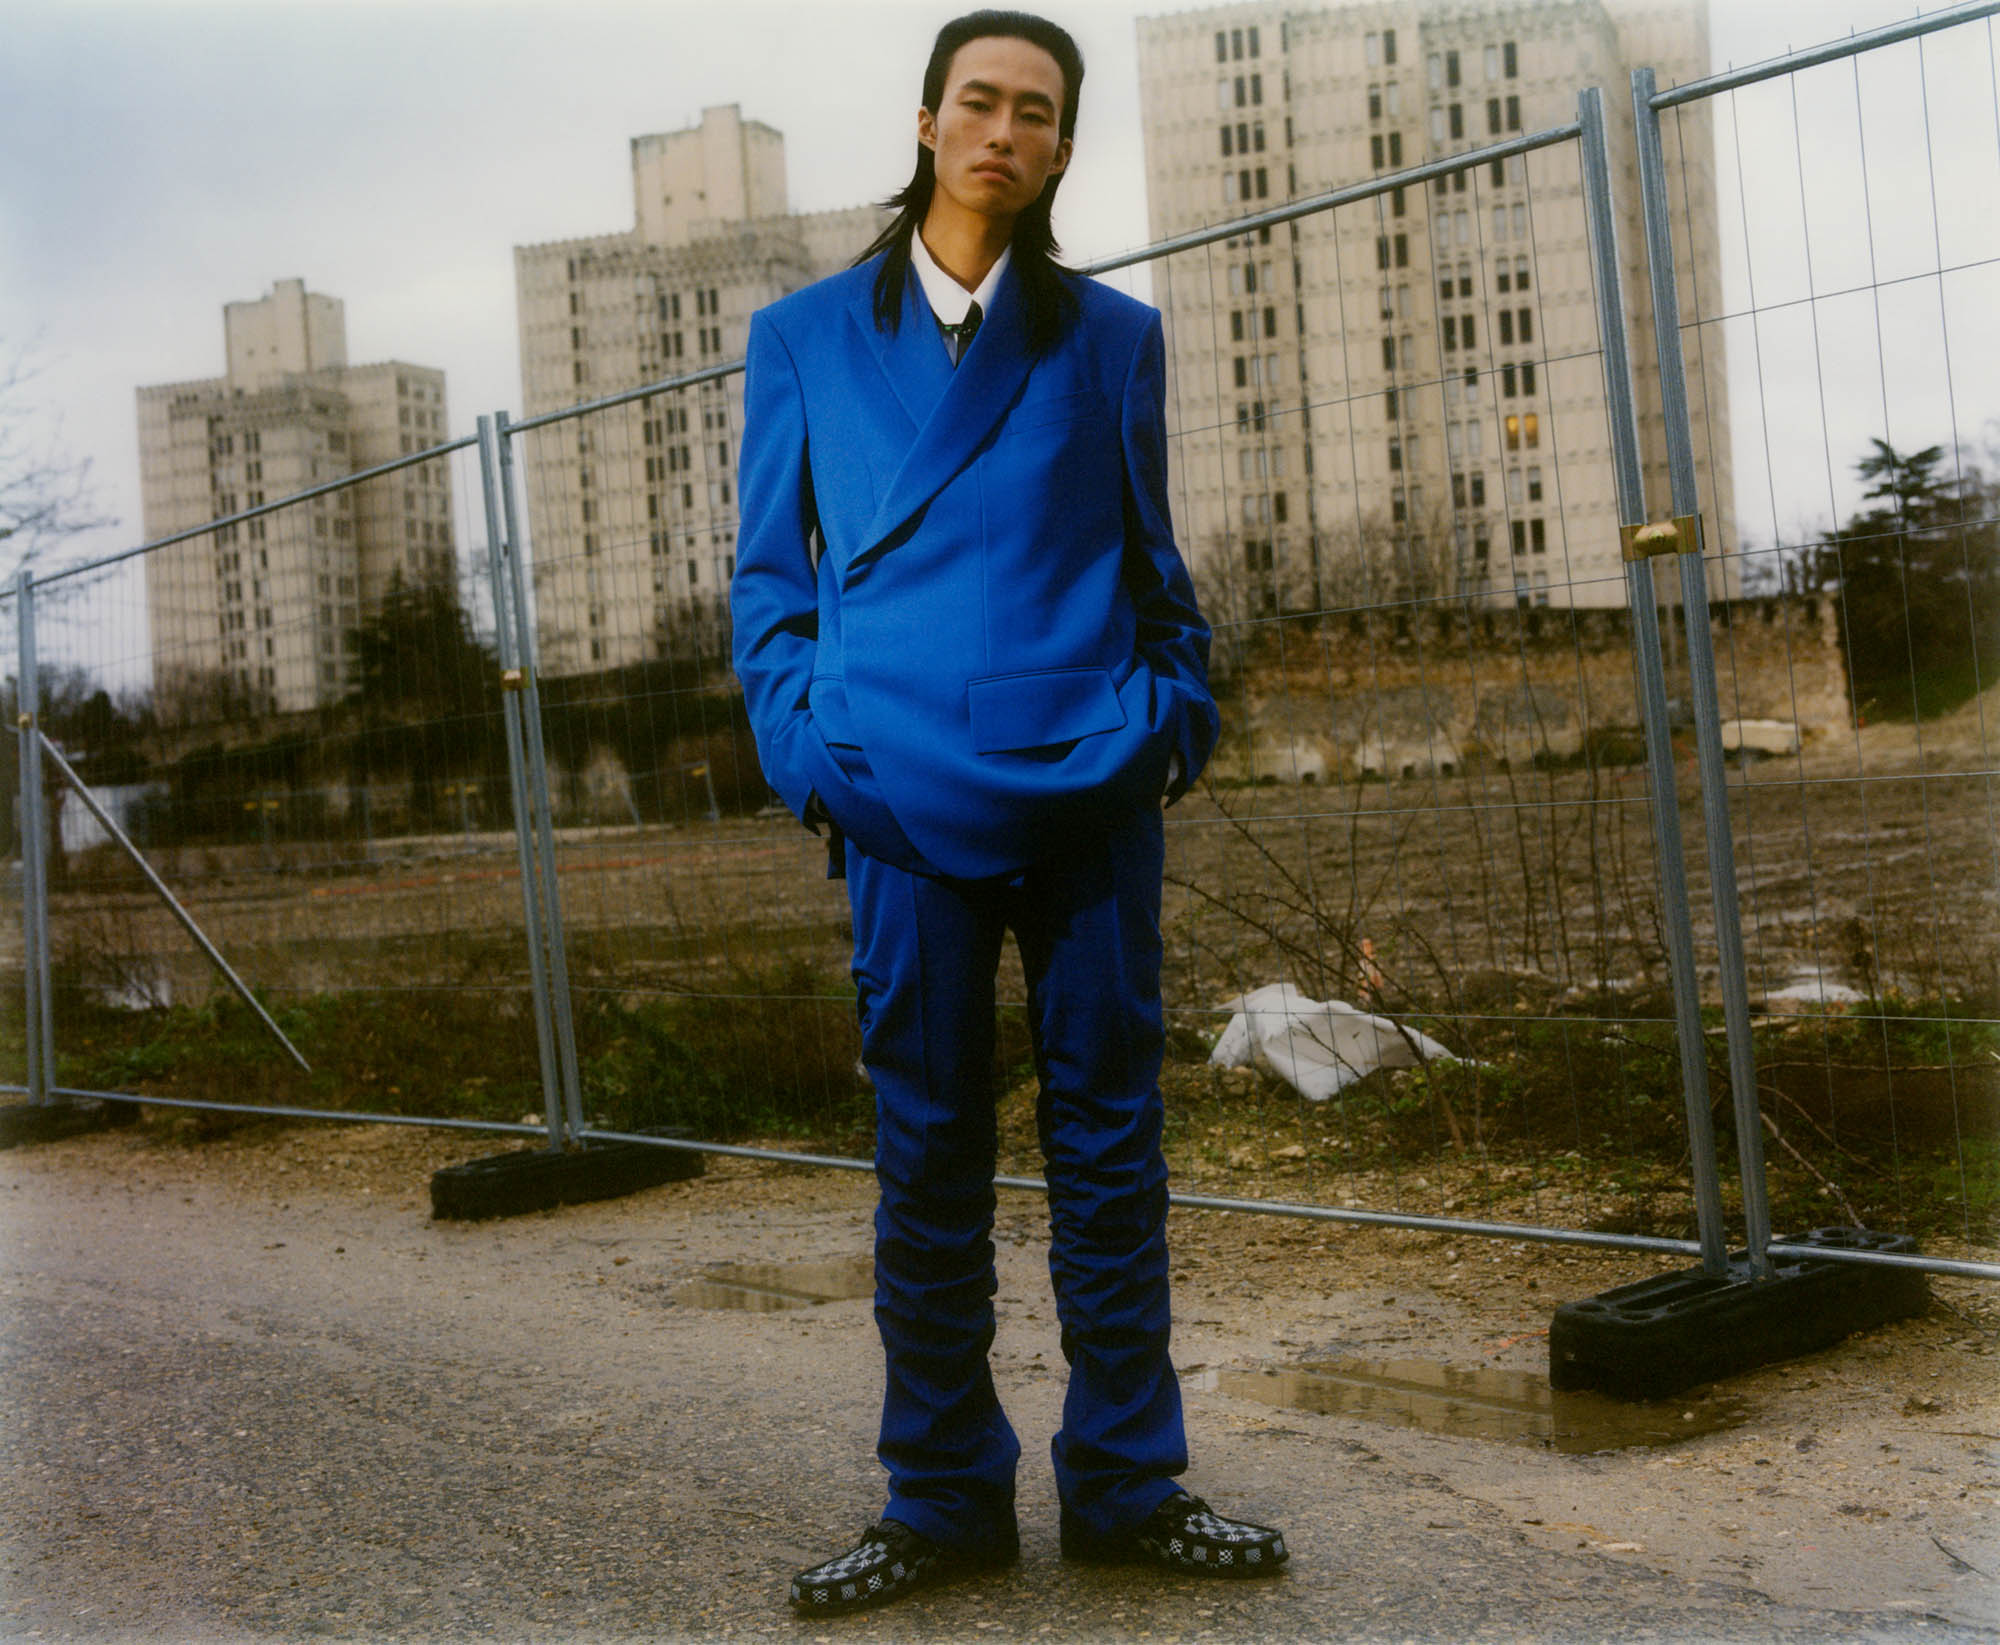 Fashion editorial for *SSAW* Magazine shot at my studio and around. As im getting a bit bored of straightforward documentary photography (especially in those times), I was happy to work on portraying fictional local characters I could have bumped into in those familiar surroundings. Here Ji Seok at a *Grand Paris* construction site in Fort d'Aubervilliers. *{Styling by Tuomas Laitinen. Hair by Yuji Okuda, Make-up by Satoko Watanabe. Casting by Rene de Bathory. Models : Xu SuMin Kim and Ji Seok. Photo assistants : William Fleming and Alassan Diawara}* - © Maciek Pożoga